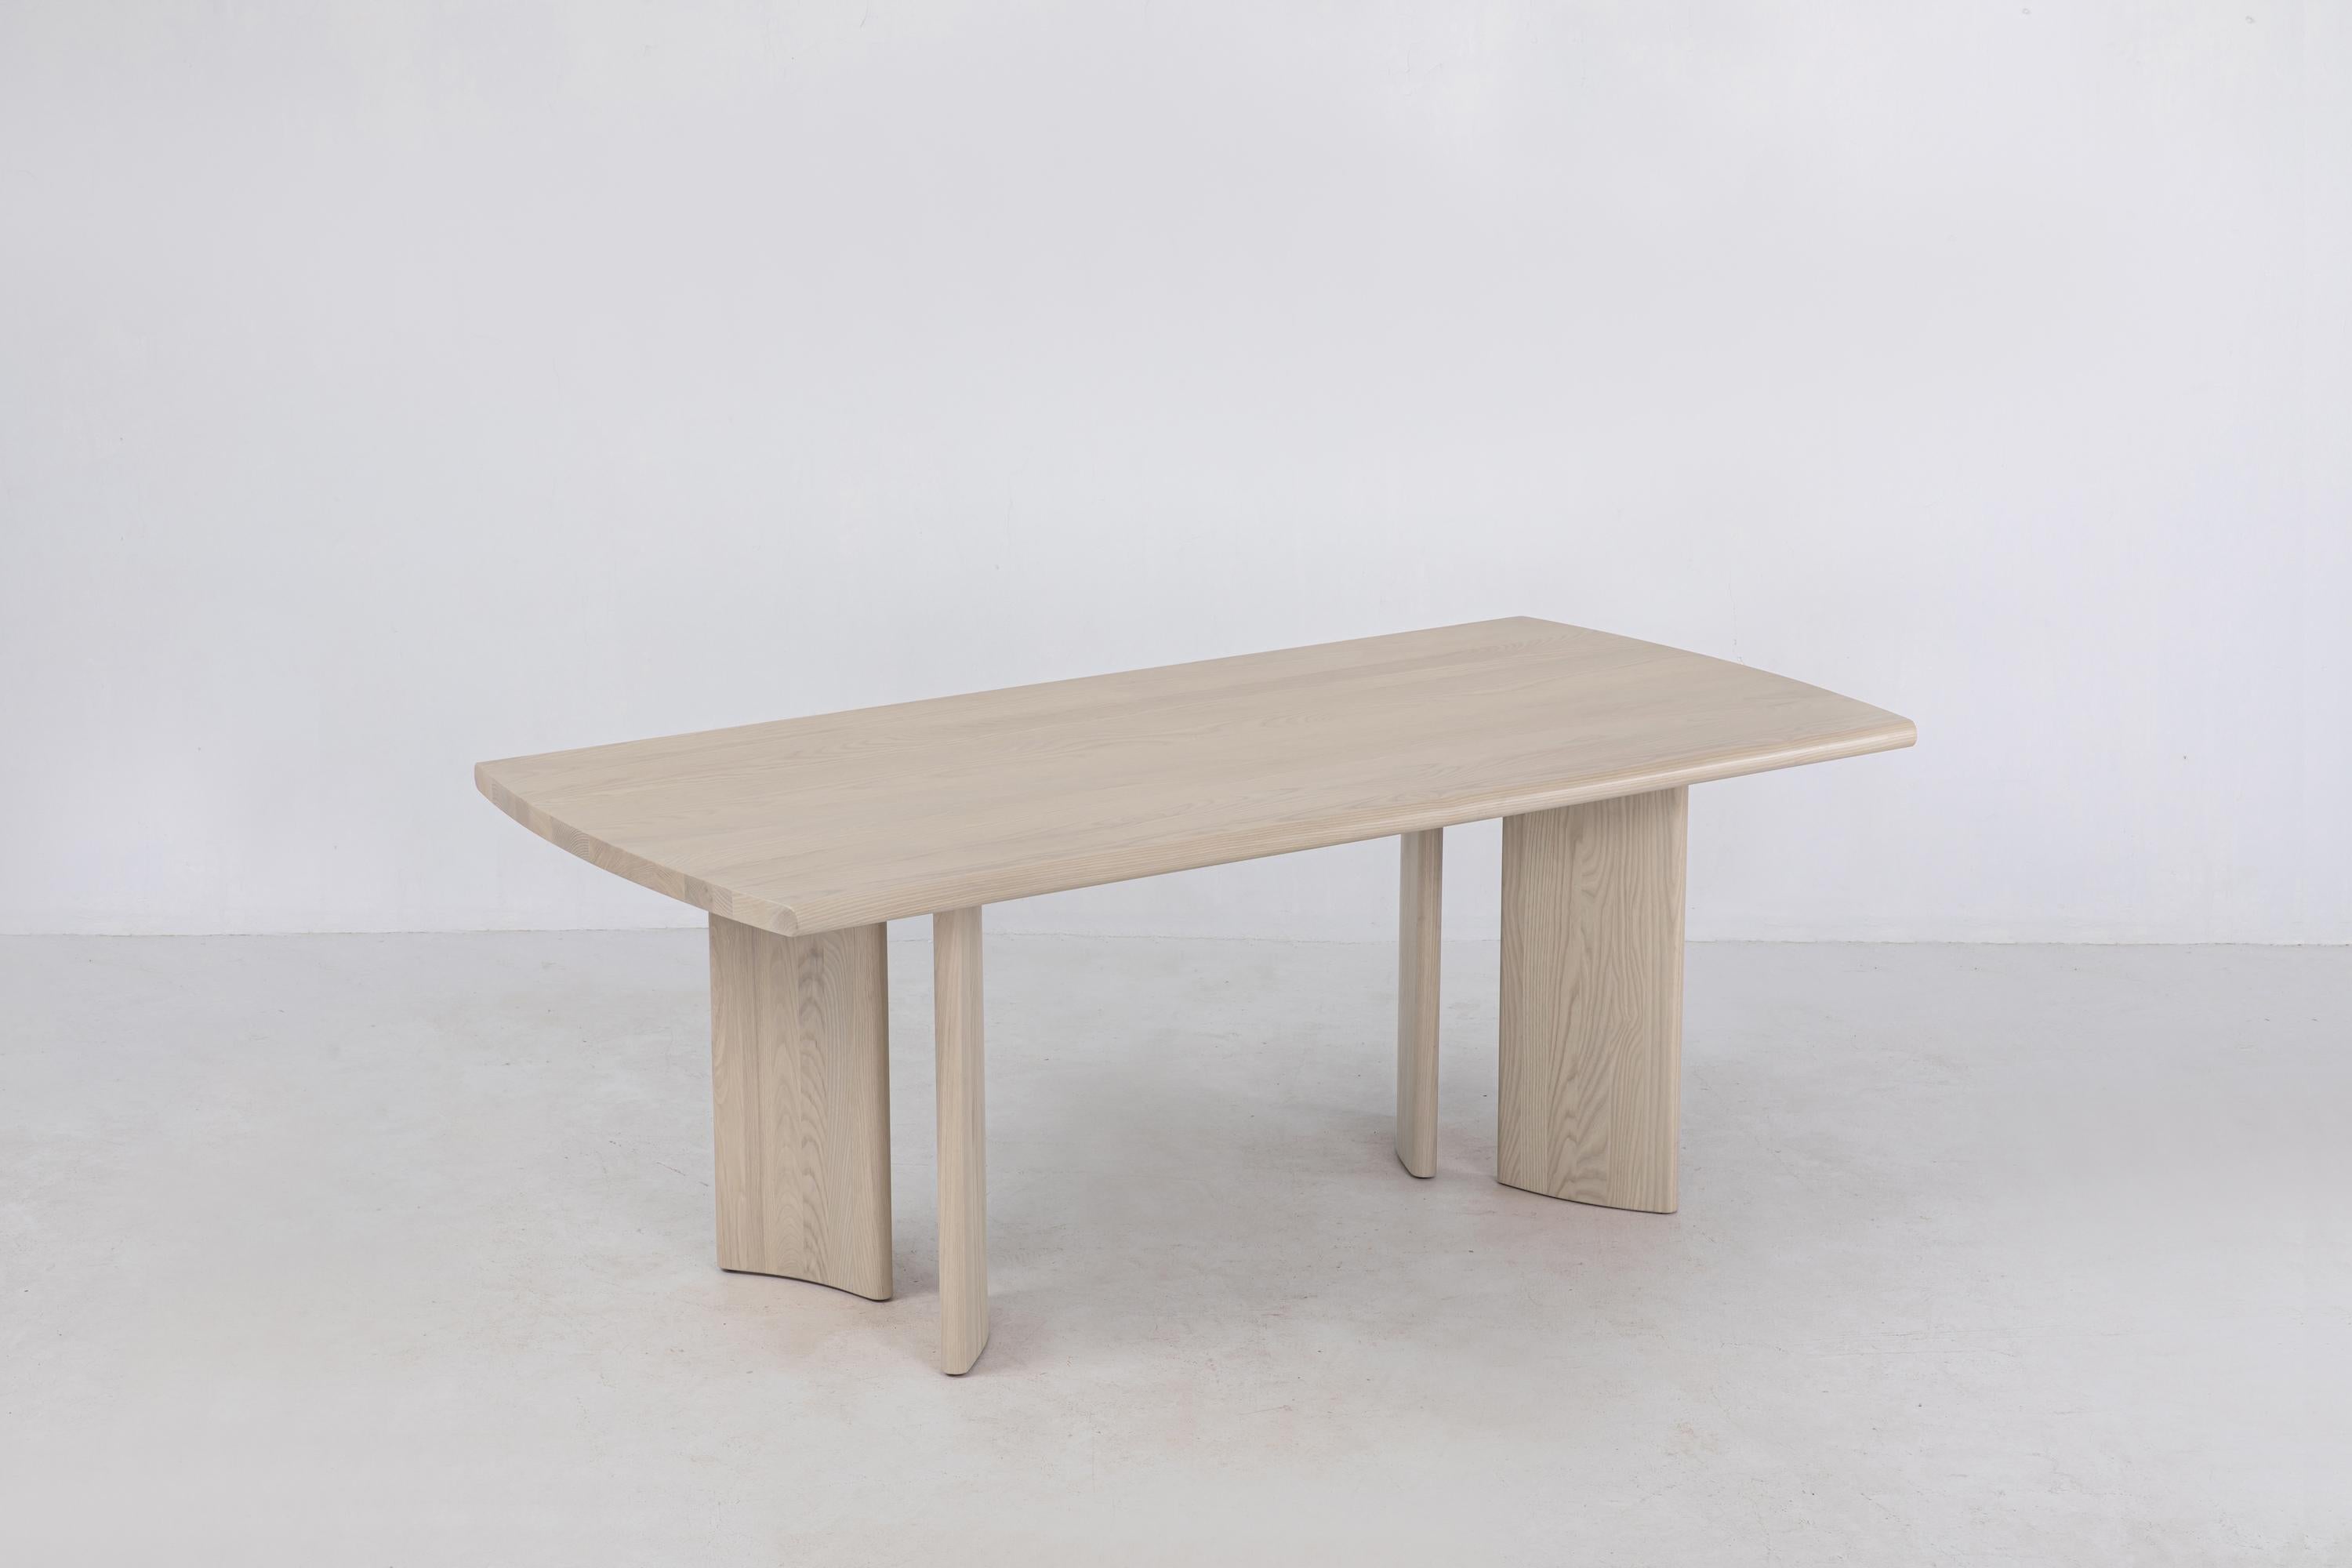 Sun at six is a contemporary furniture design studio working with traditional Chinese joinery masters to handcraft our pieces using traditional joinery. The crest table is our statement, large dining table.

Great furniture begins with quality